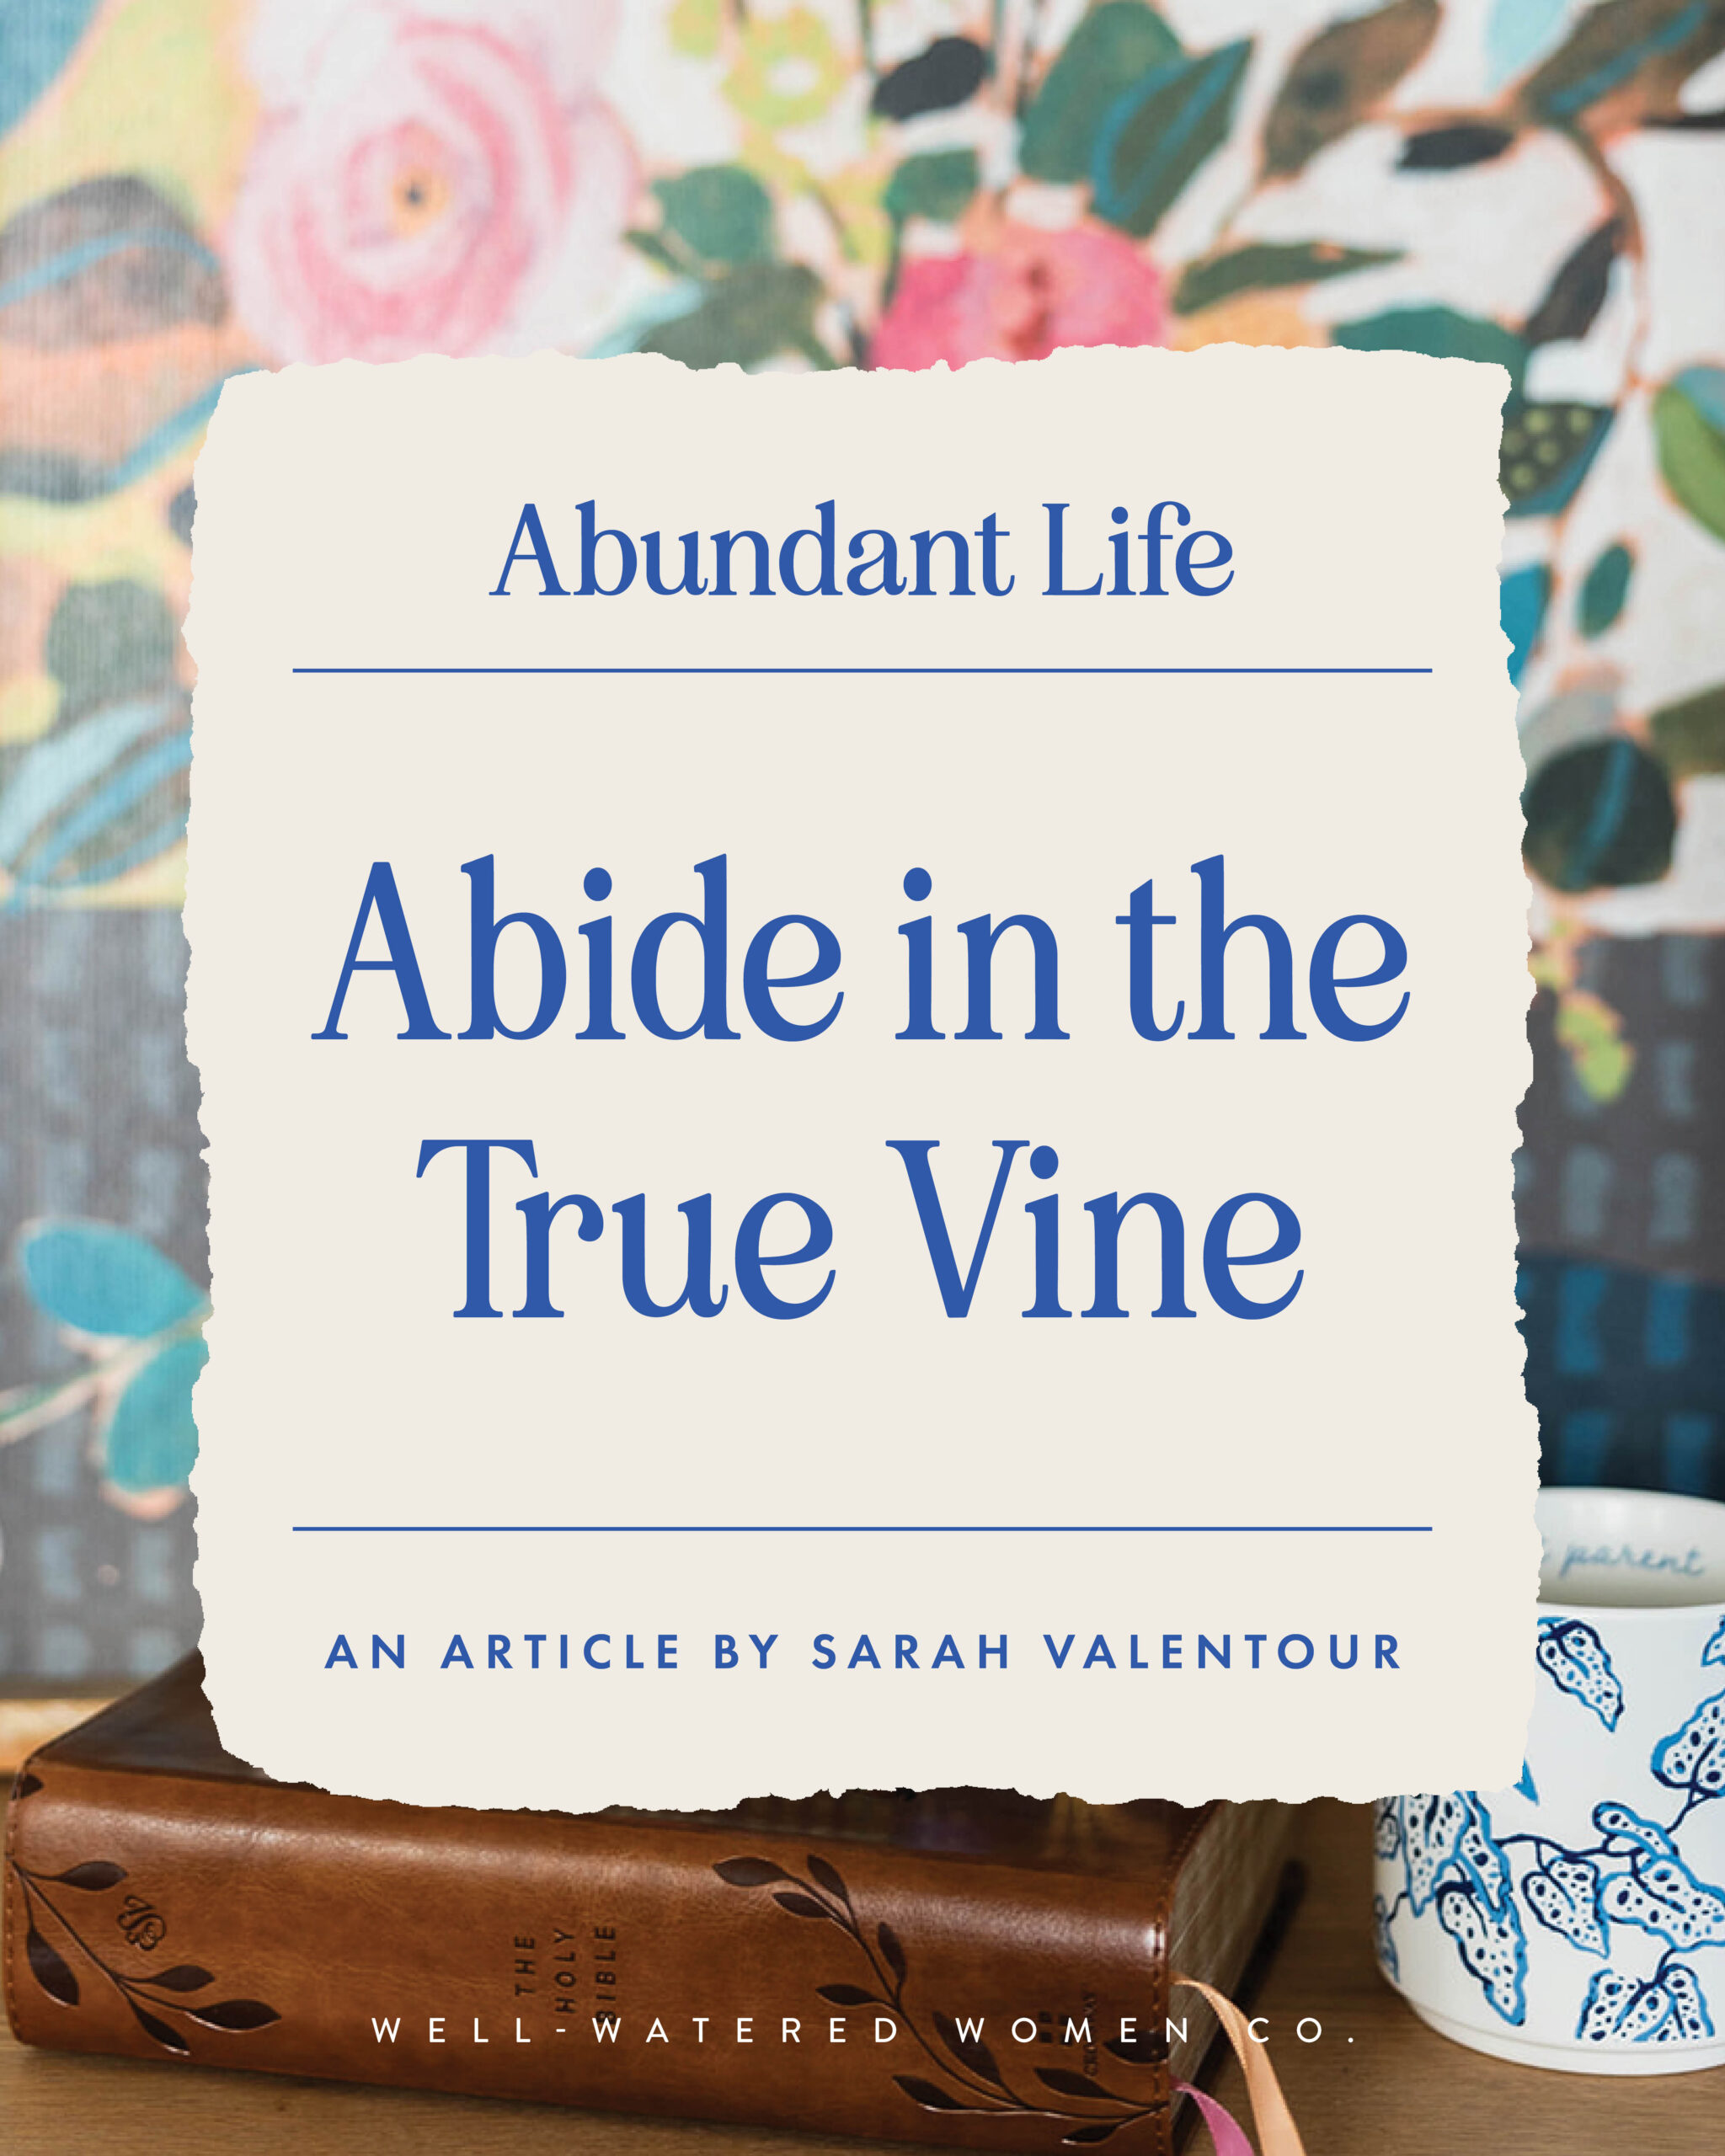 Abide in the True Vine - an article from Well-Watered Women